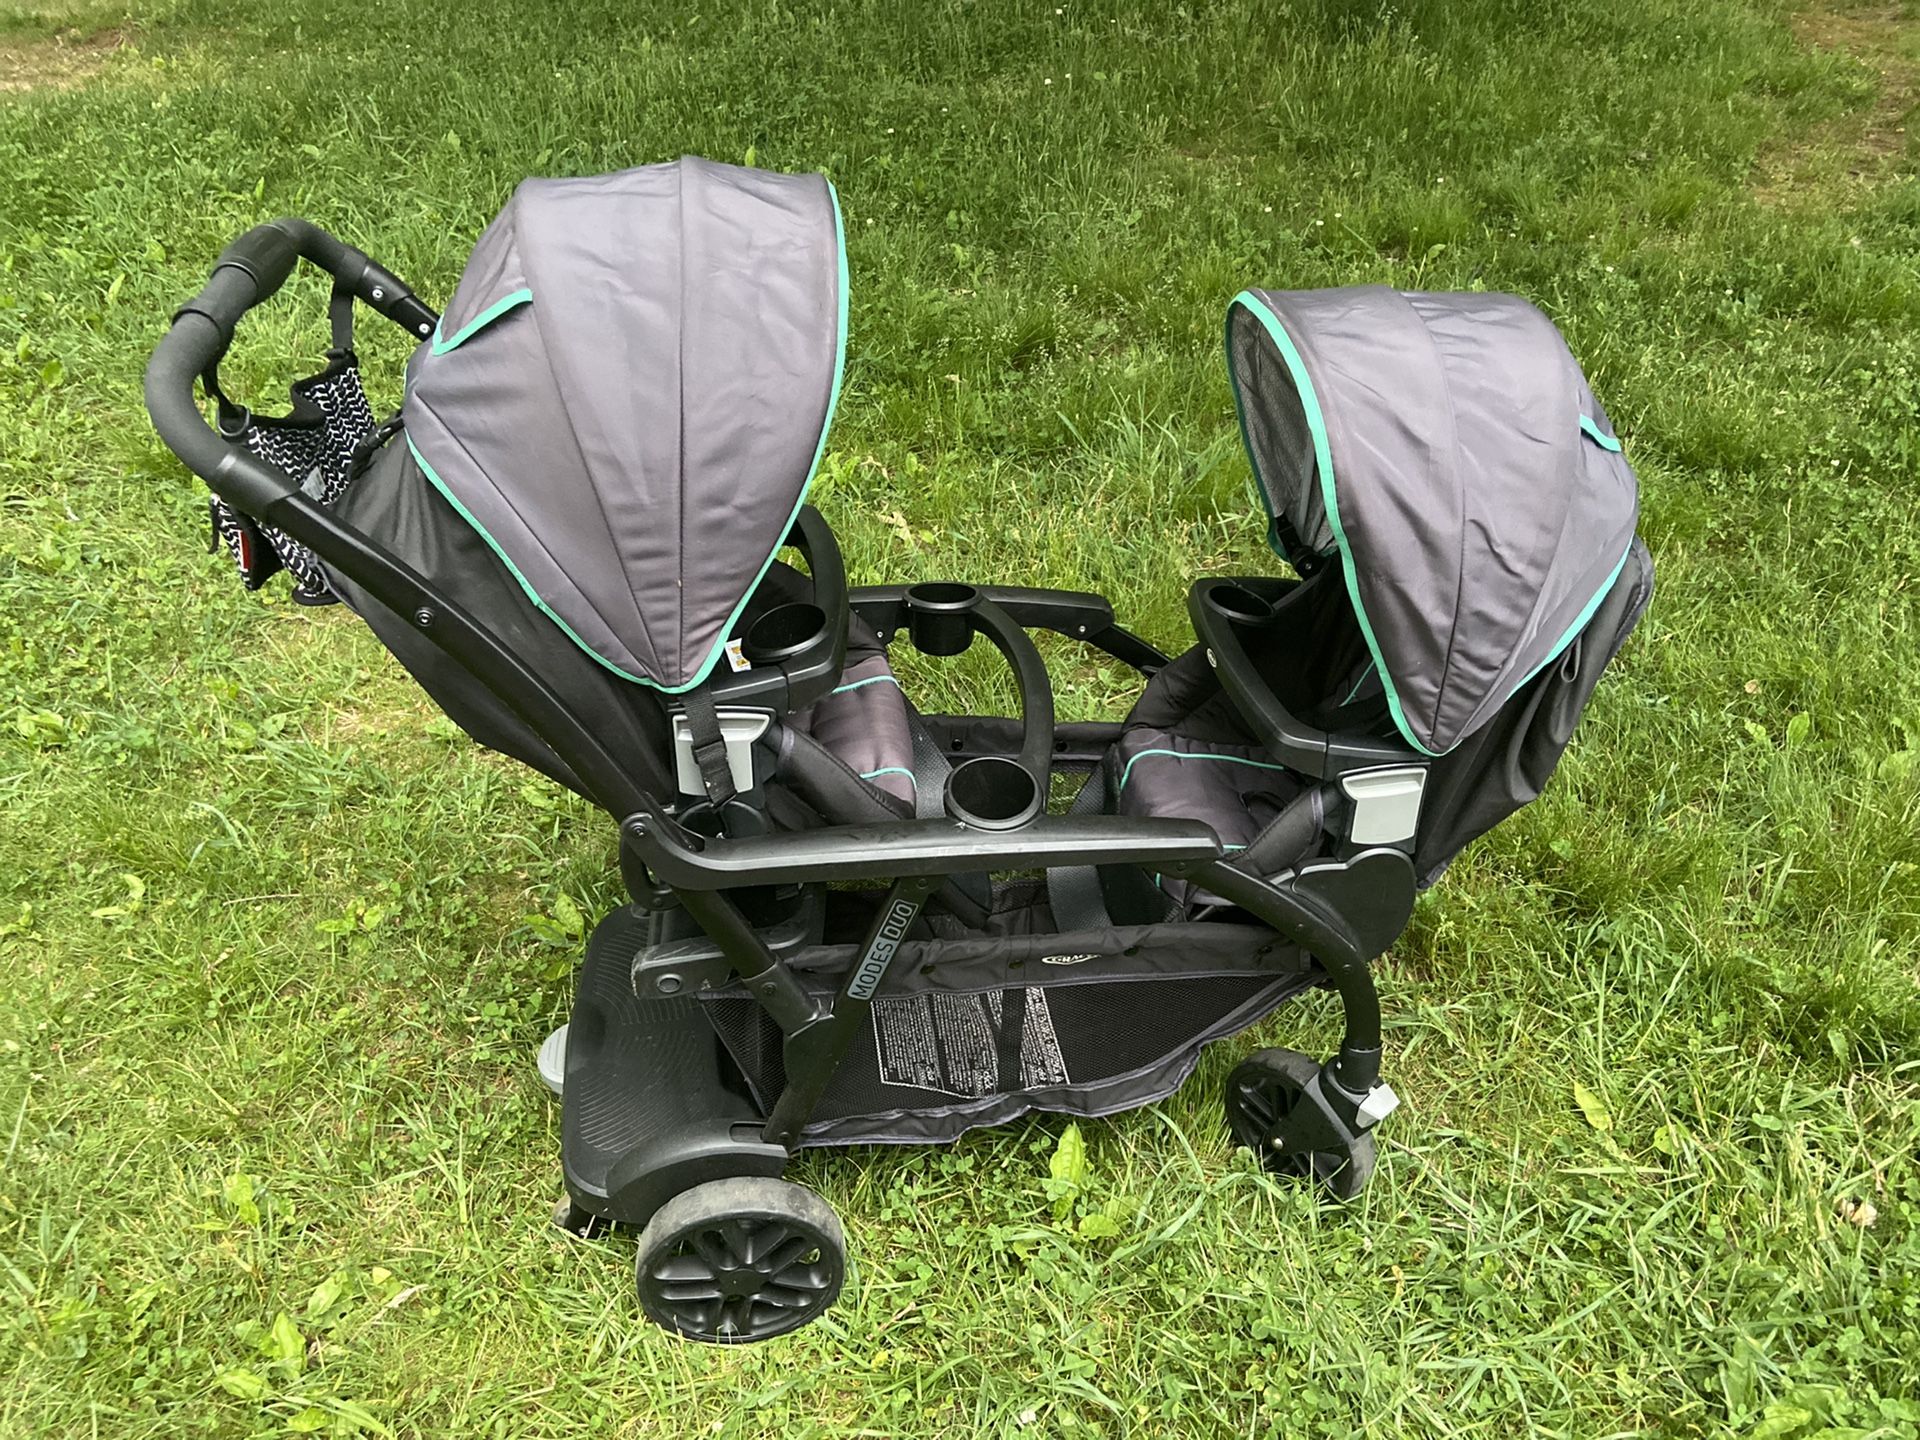 Double Stroller - Greco click connect Modes Duo